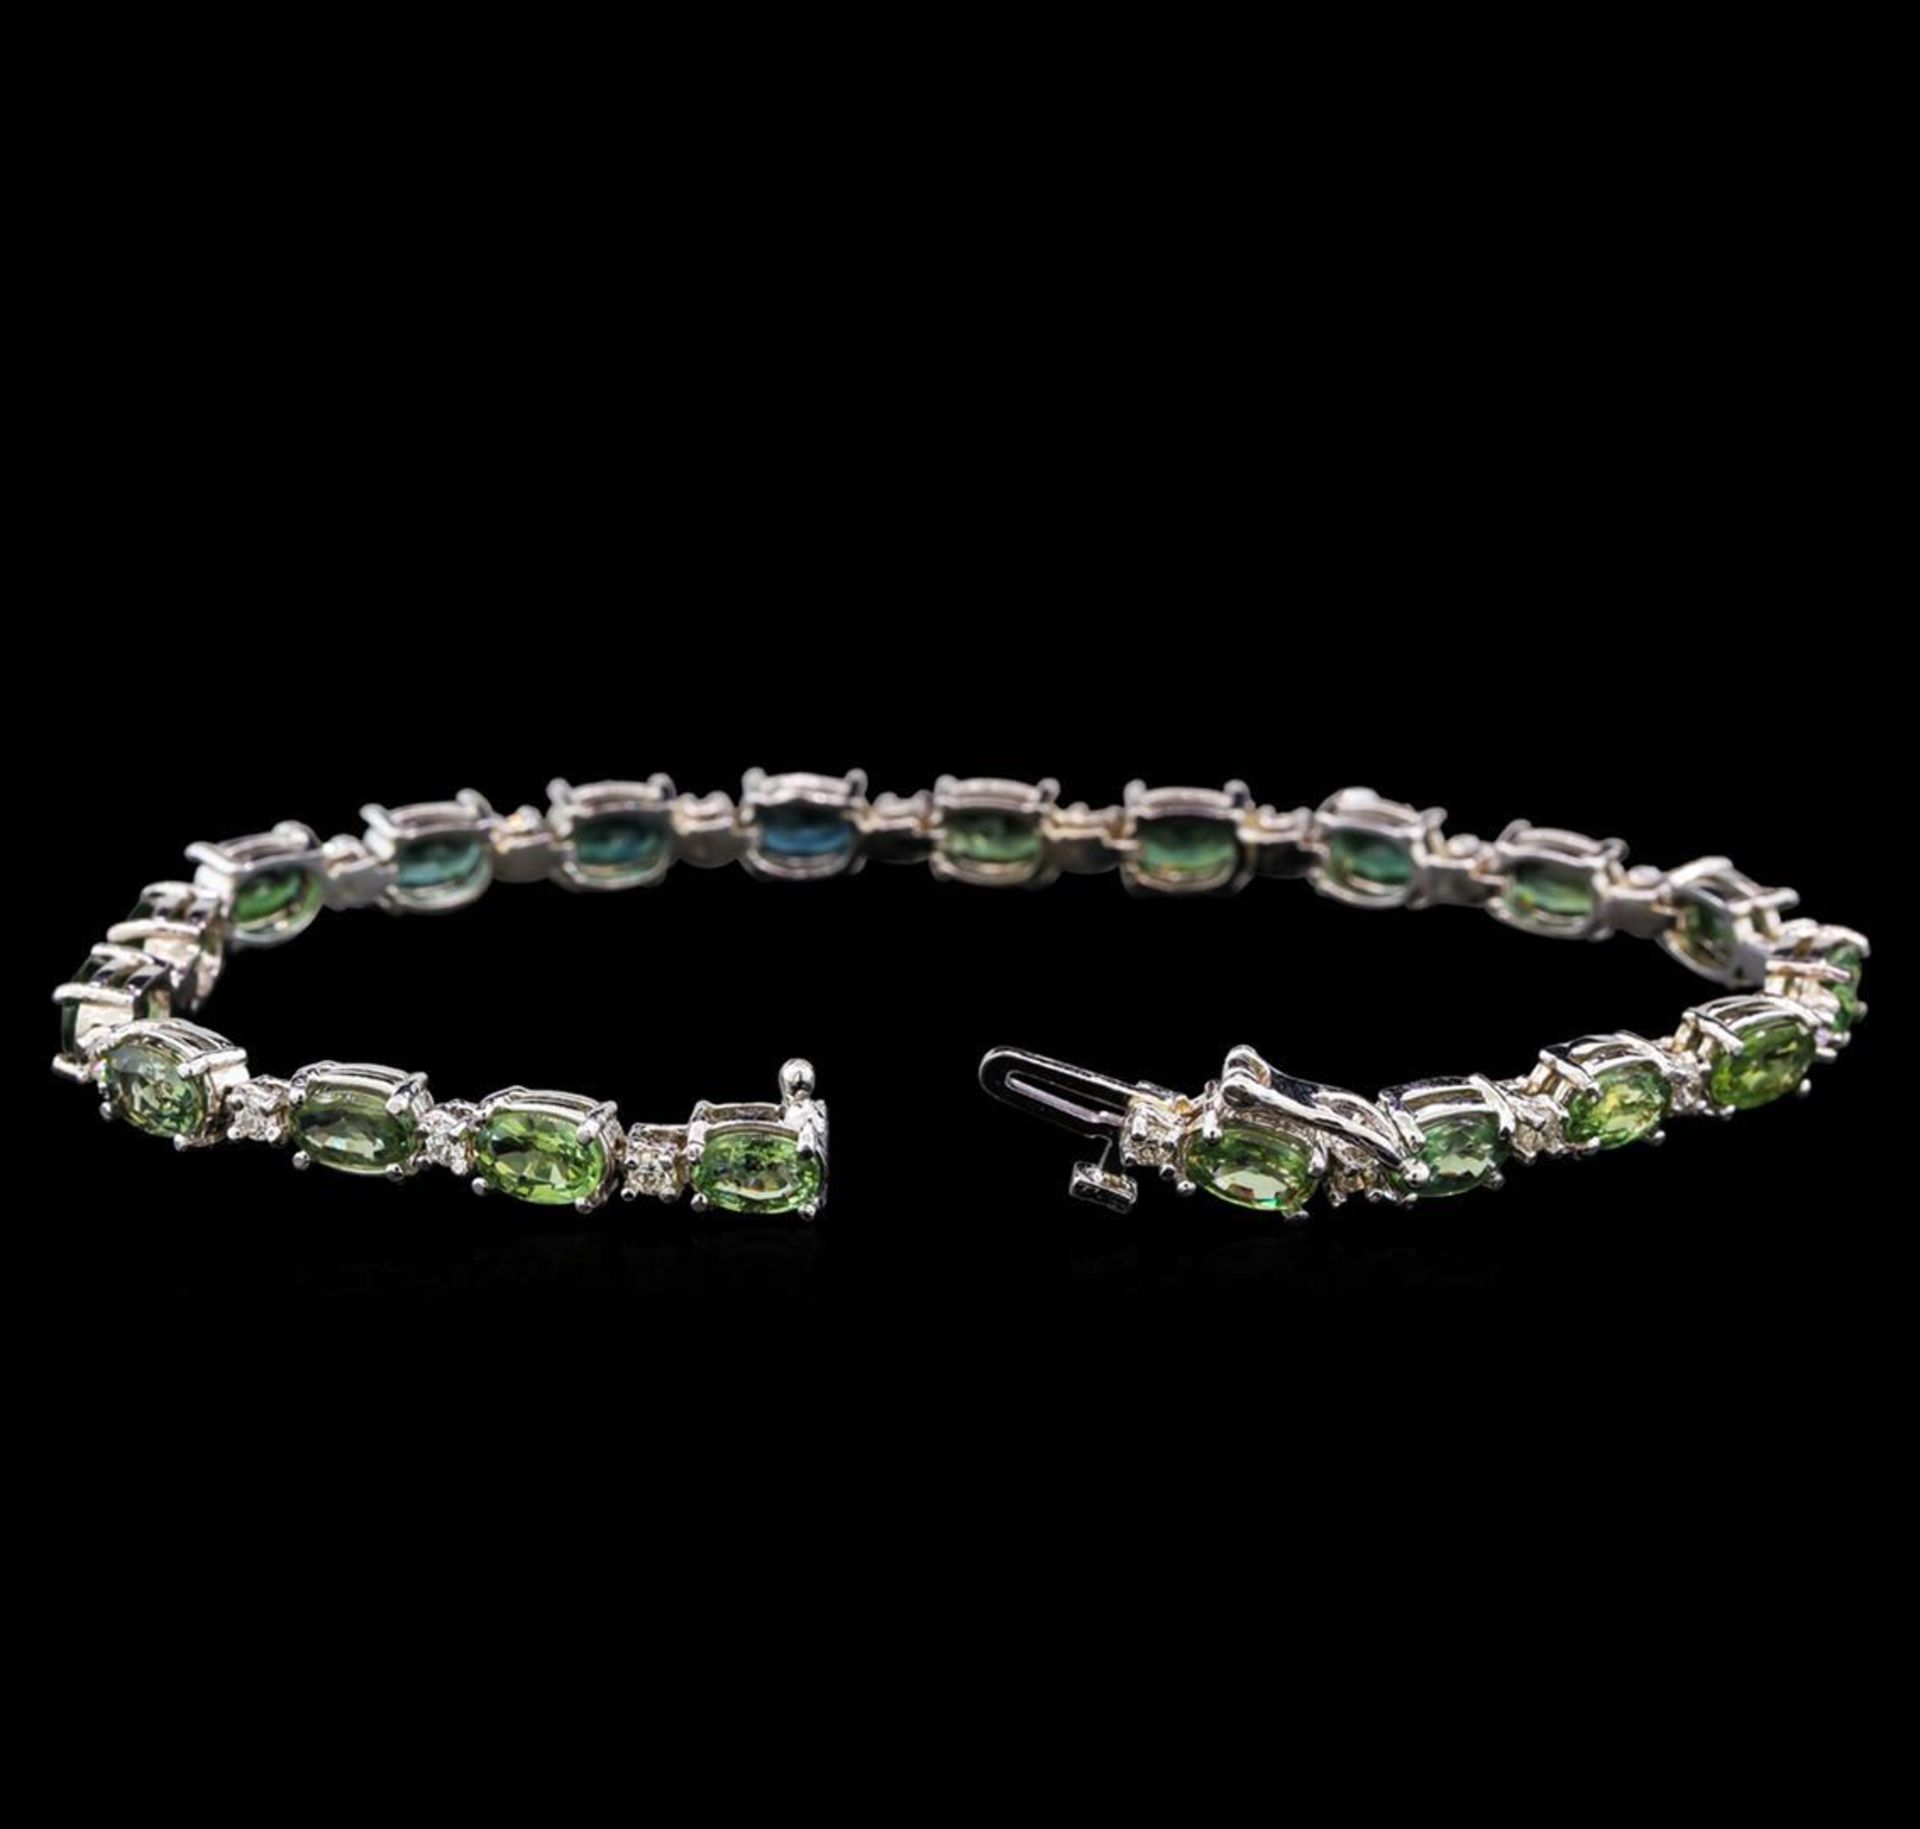 14KT White Gold 11.20 ctw Green Sapphire and Diamond Bracelet - Image 3 of 4